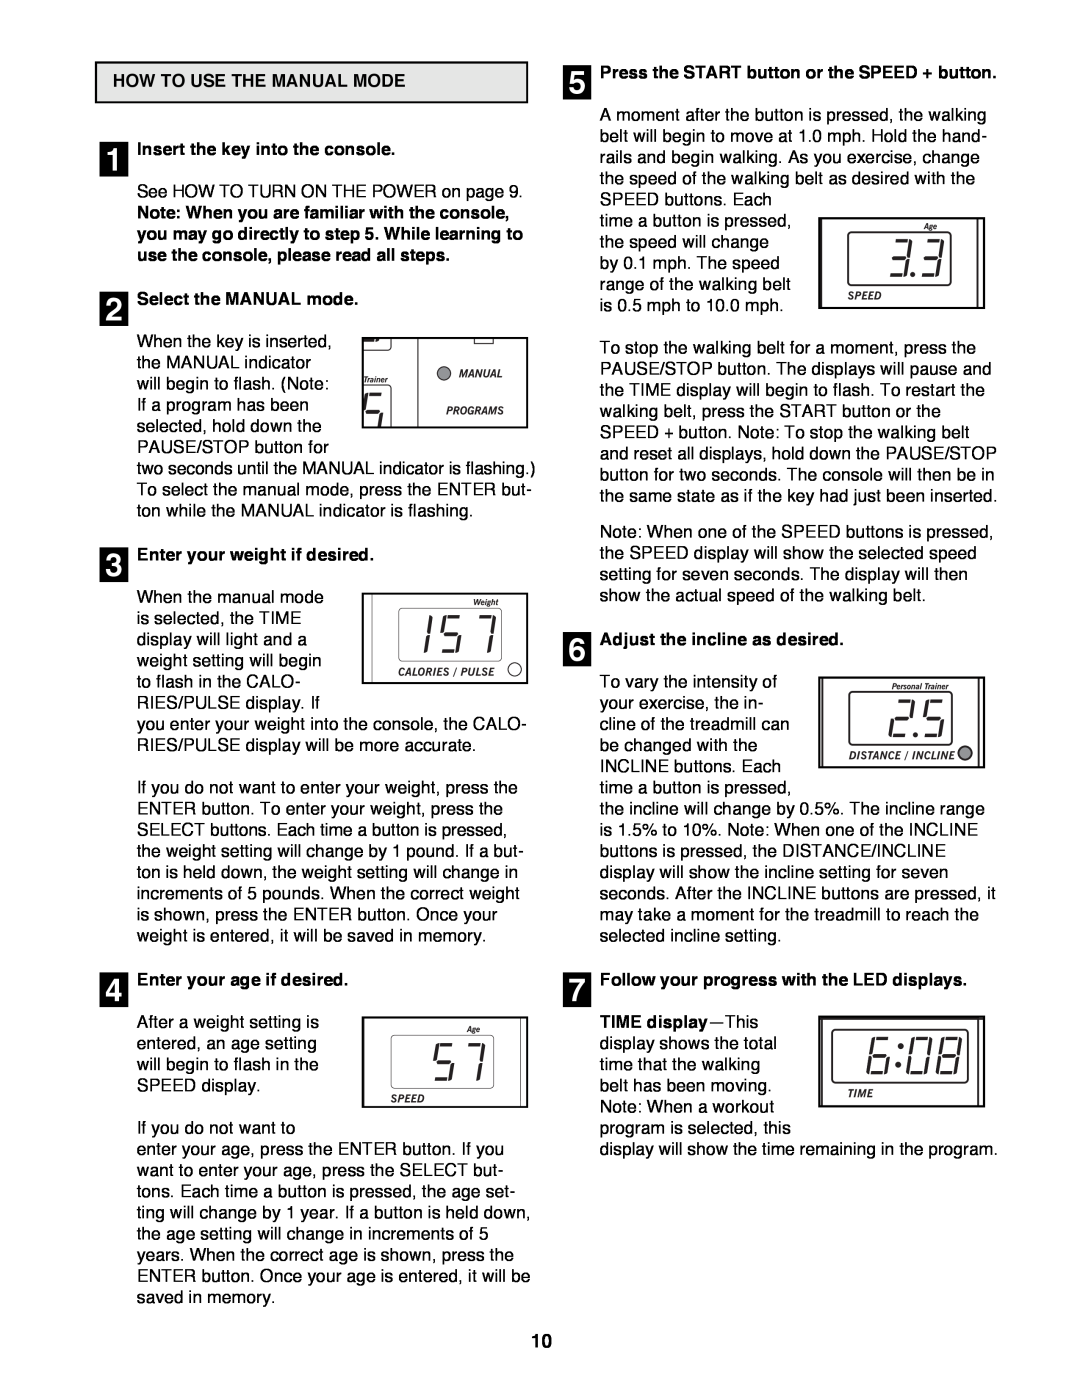 Healthrider HRTL14980 manual HOW TO USE THE MANUAL MODE 1 Insert the key into the console, Select the MANUAL mode 